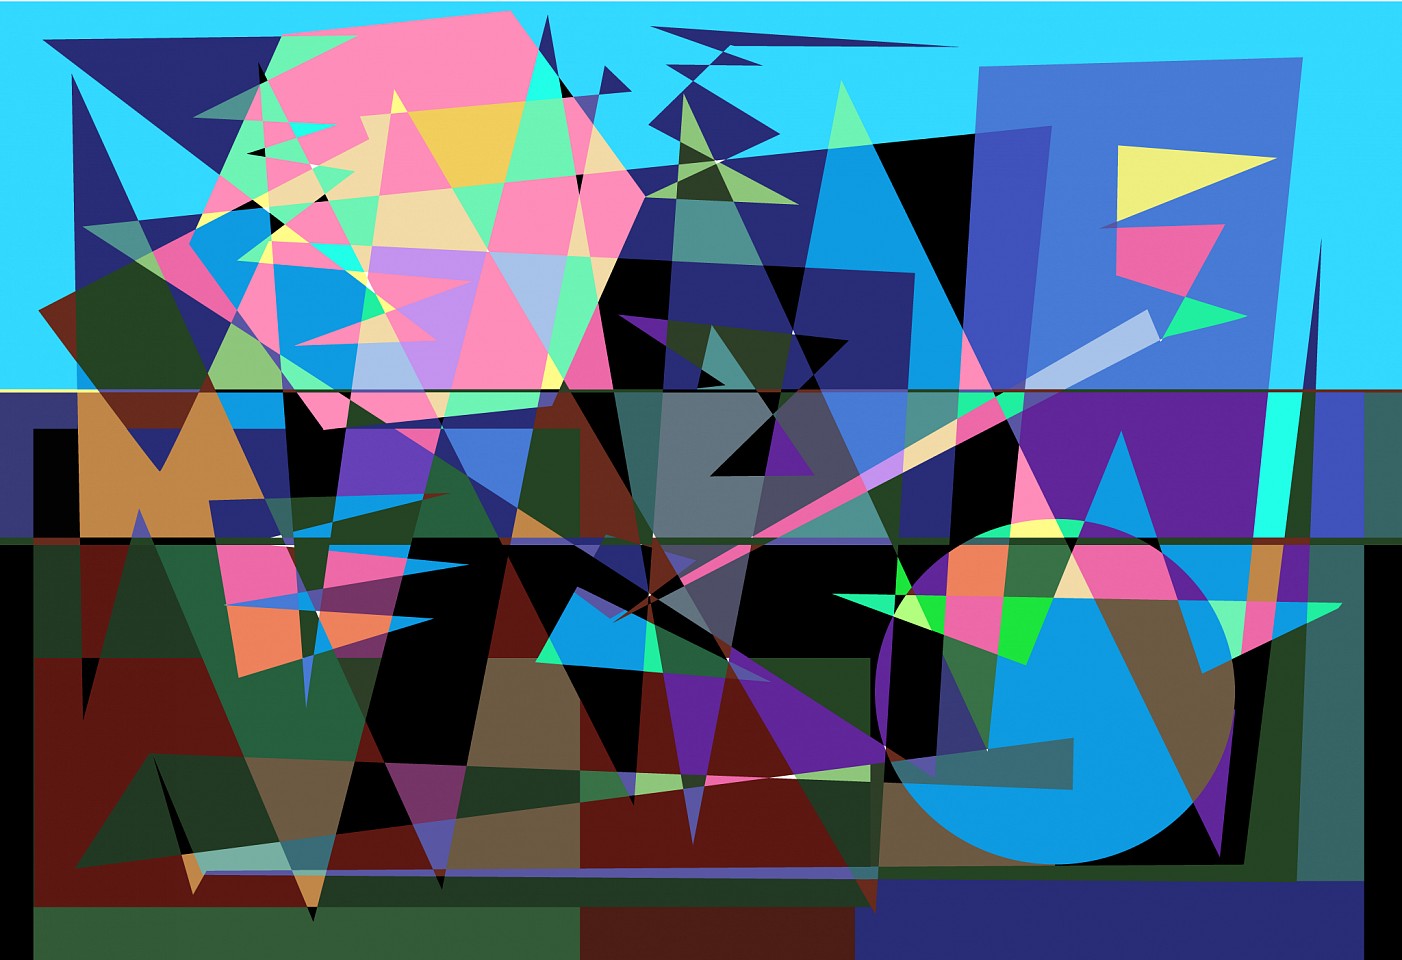 Dane Albert, Shapes #1, 2023
Acrylic on canvas (Concept), 48 x 72 in. (121.9 x 182.9 cm)
Series of colored lines and shapes in multiple configurations
DA.2023.shapes-001